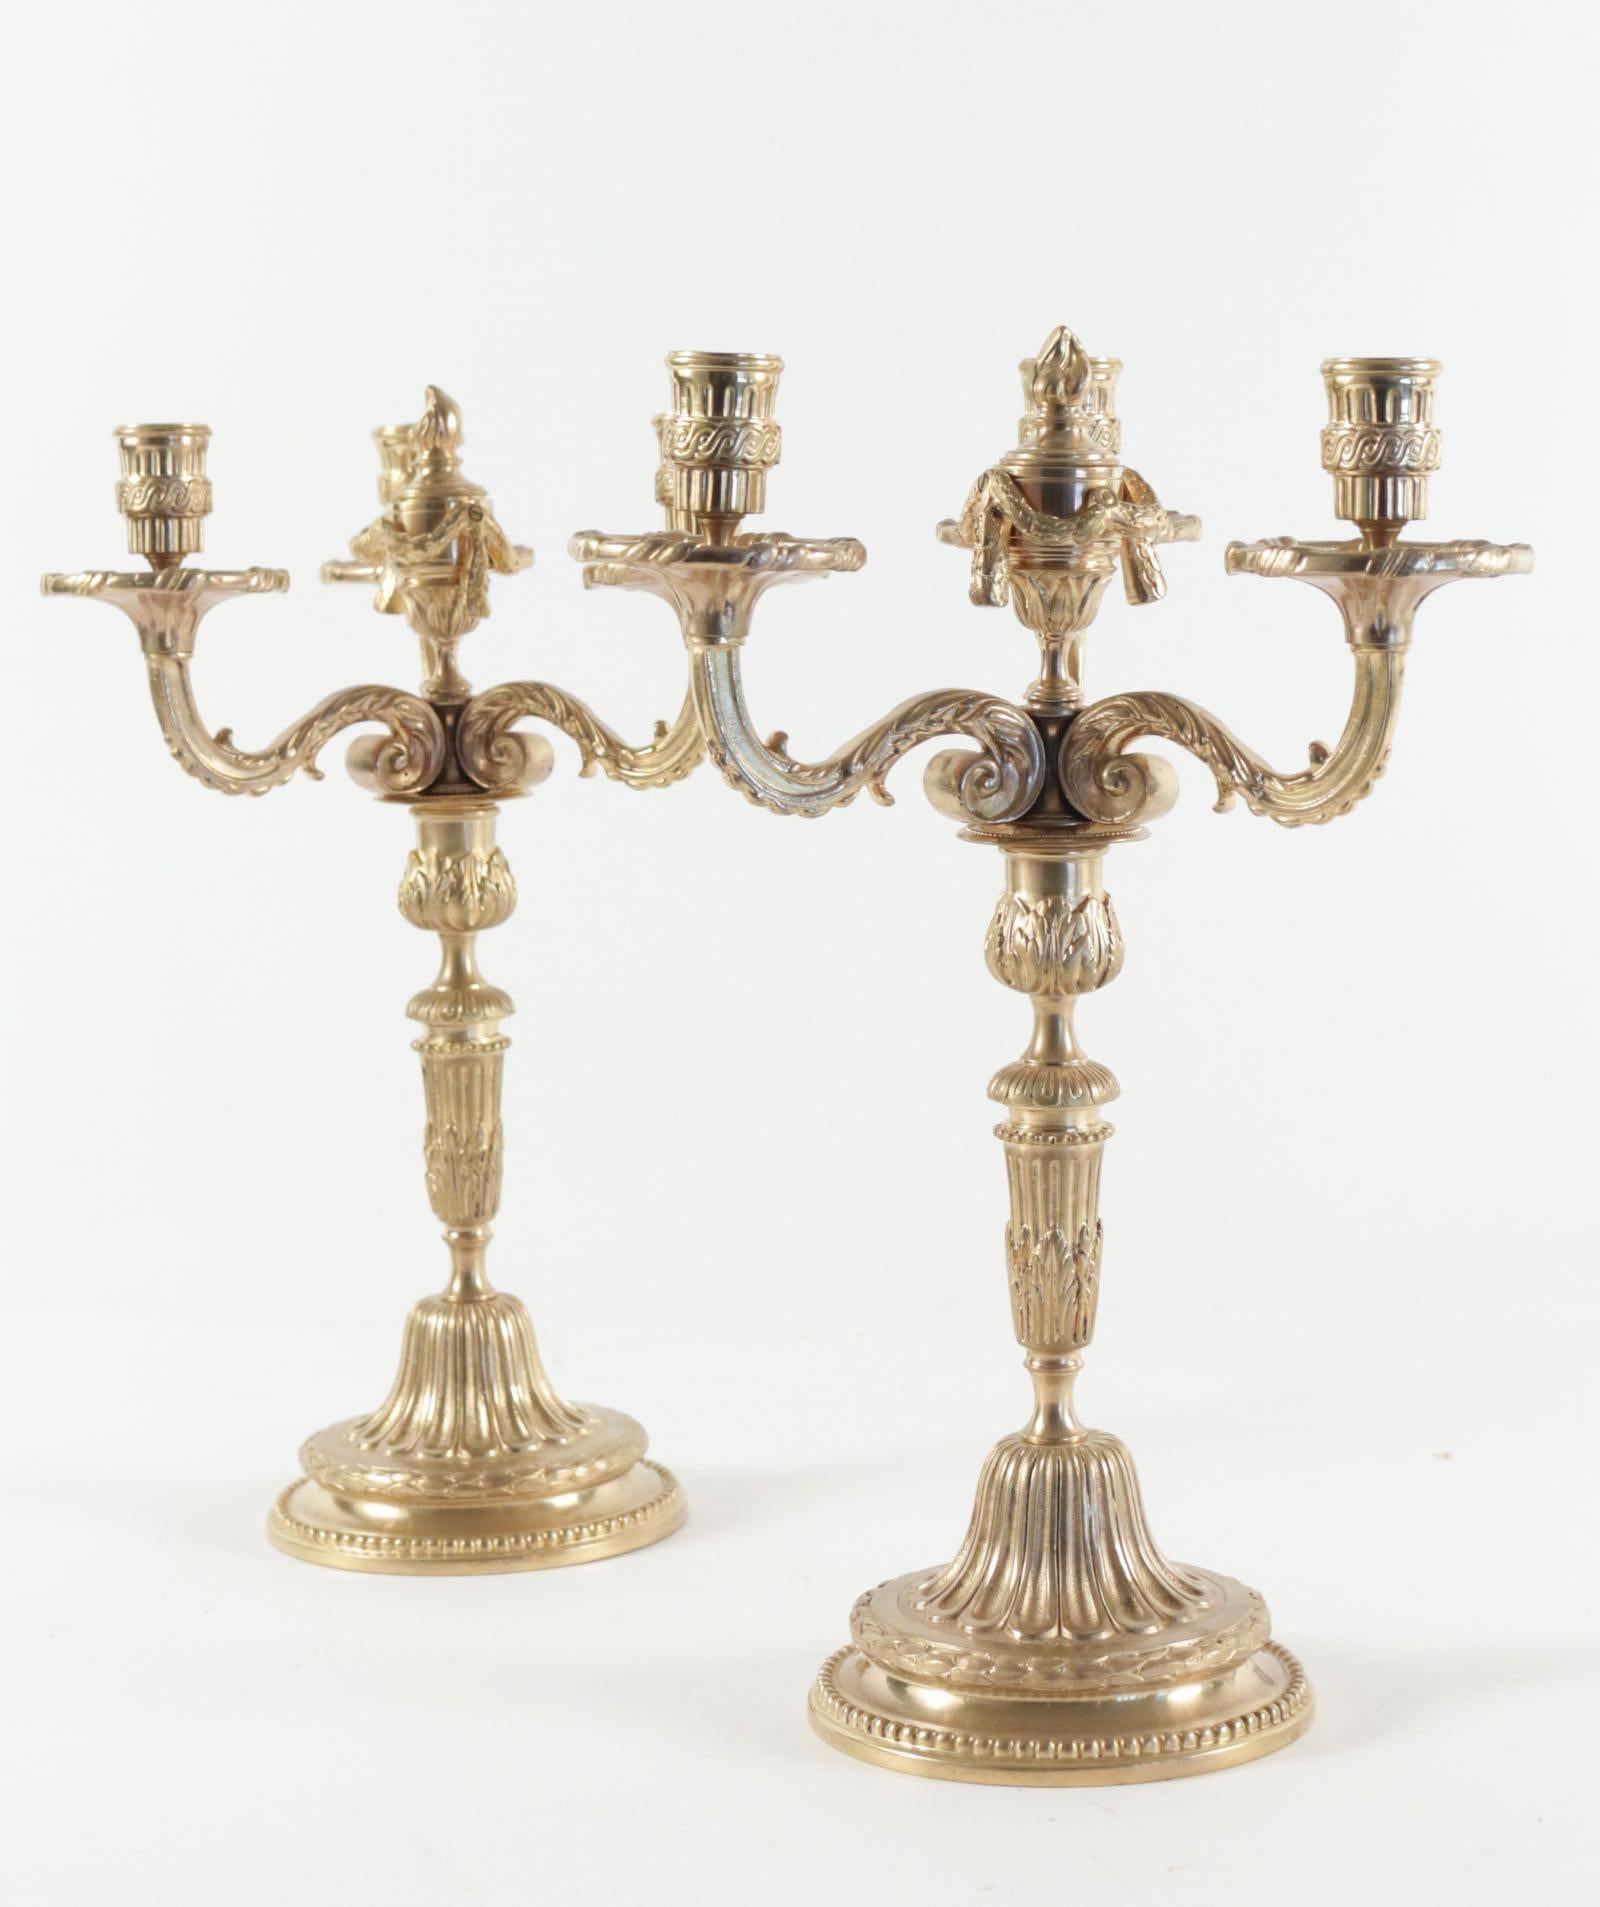 French Pair of Candelabra in the Style of Louis XV in Gold Gilt Bronze, 19th Century